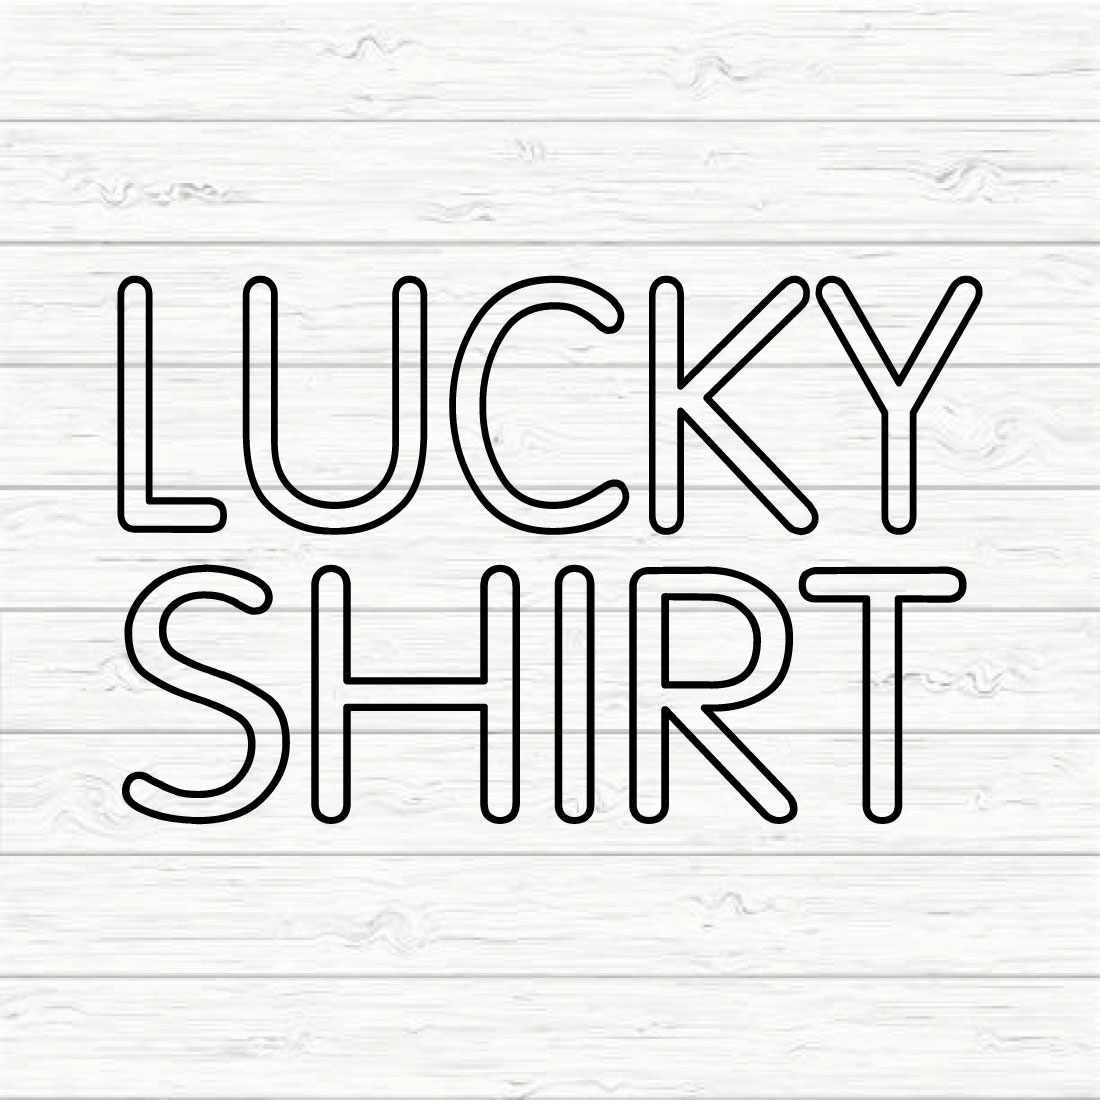 Lucky Shirt cover image.